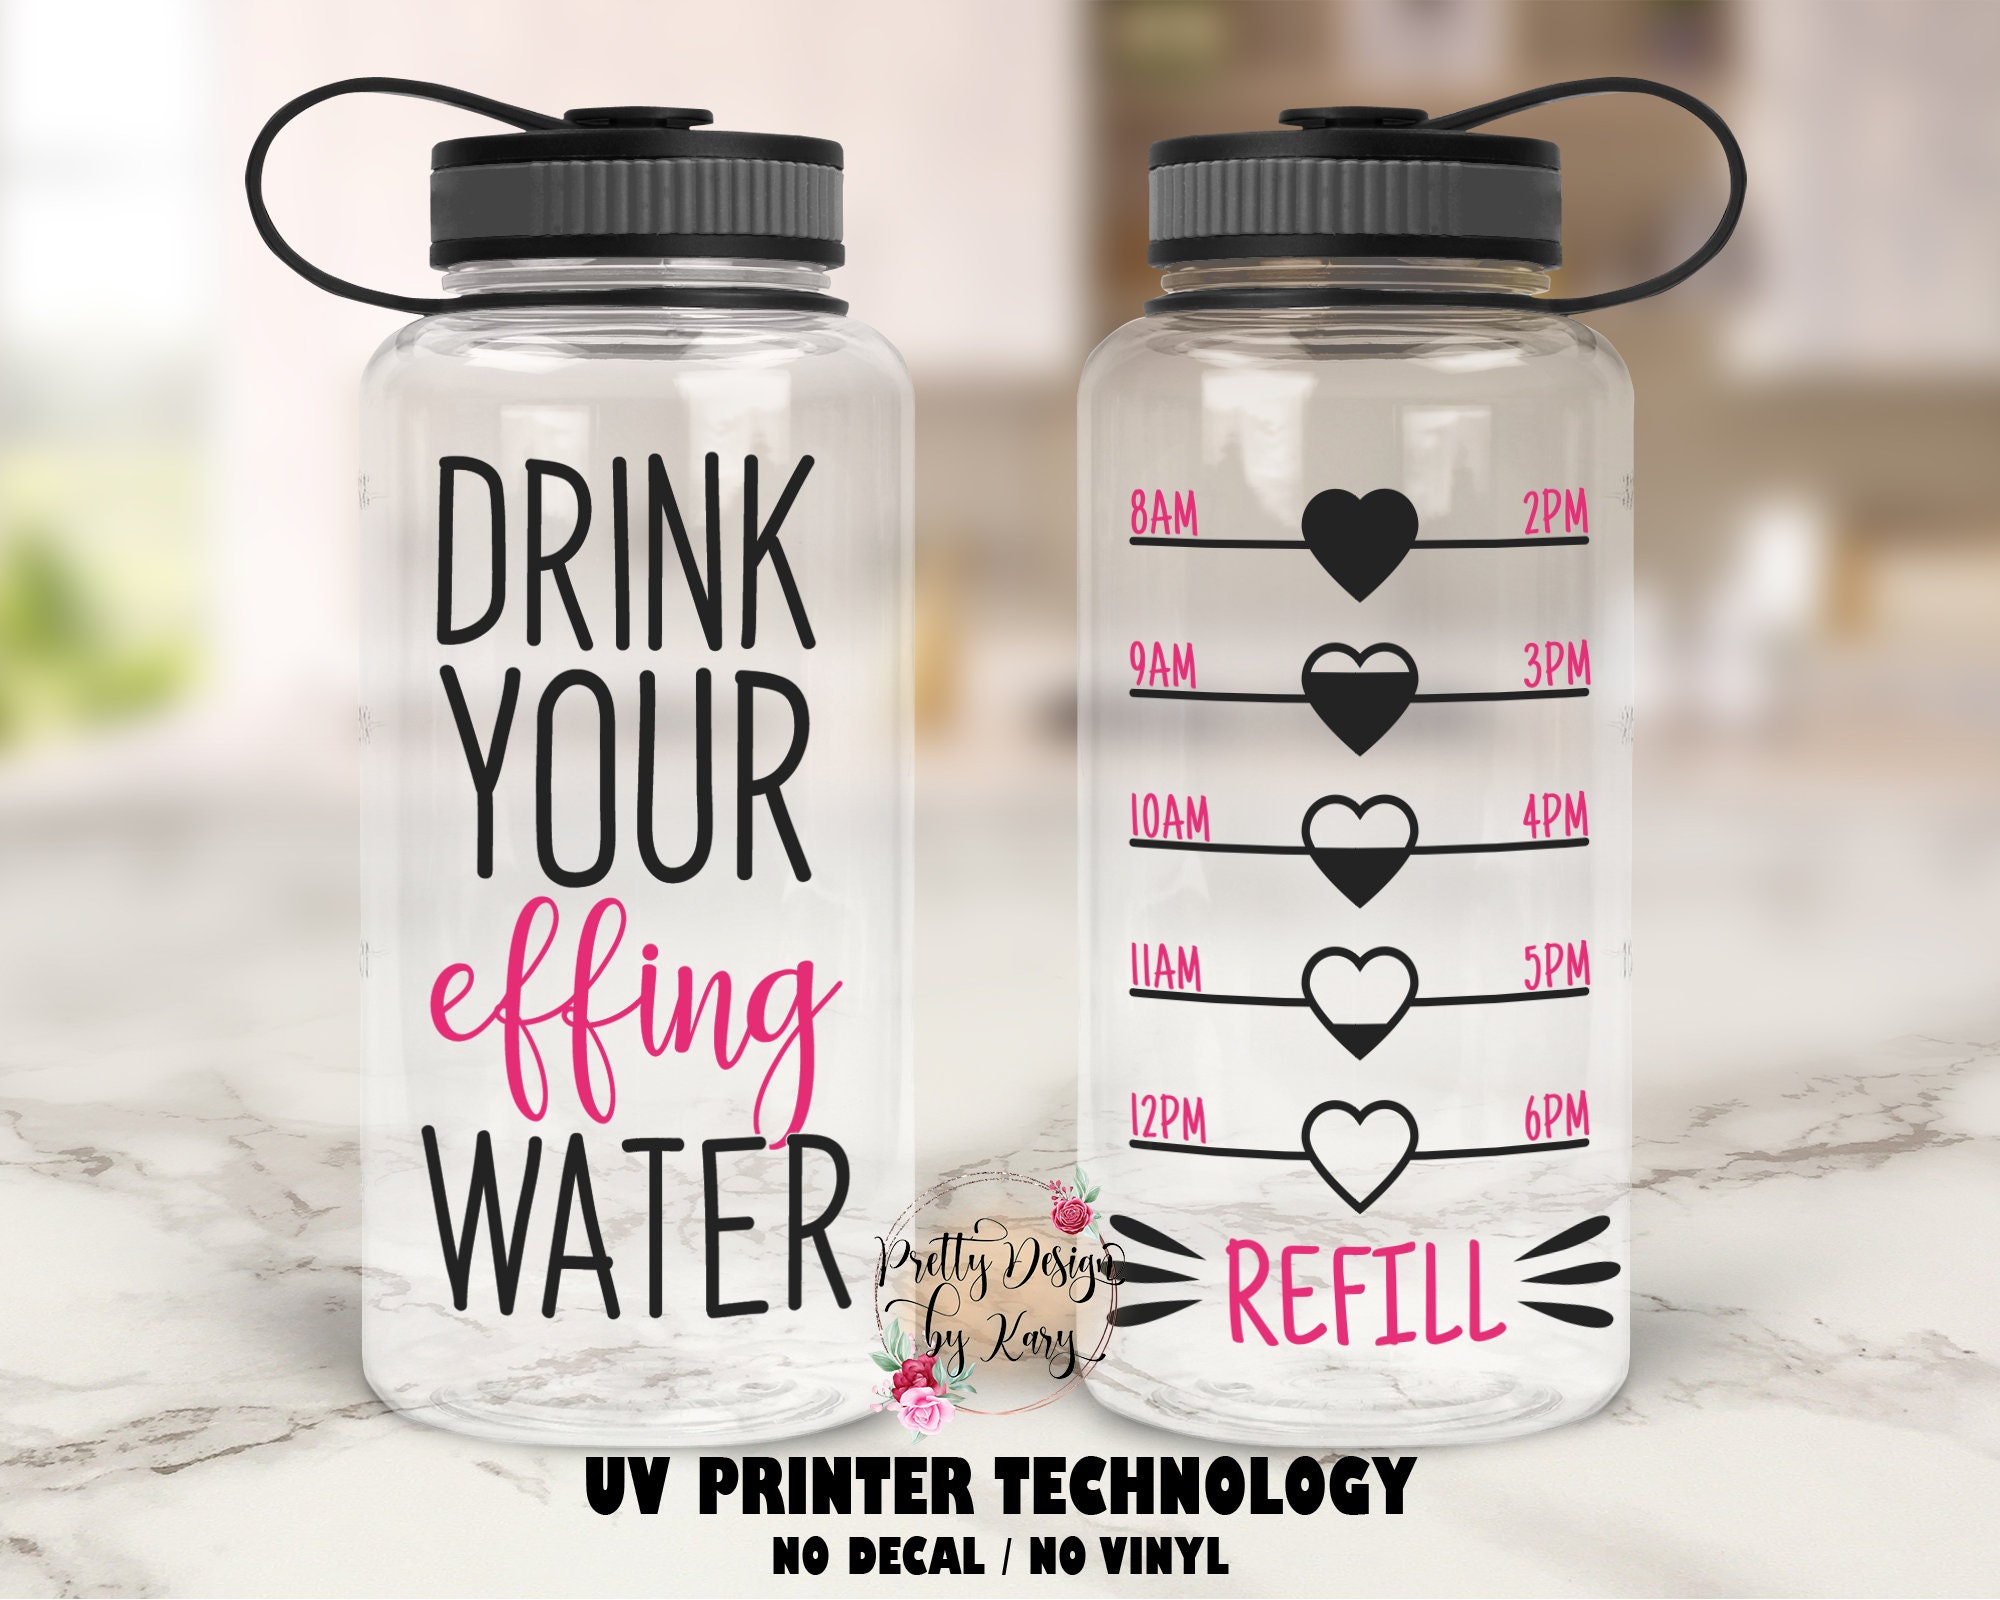 Loving this water bottle that visually reminds you when to drink